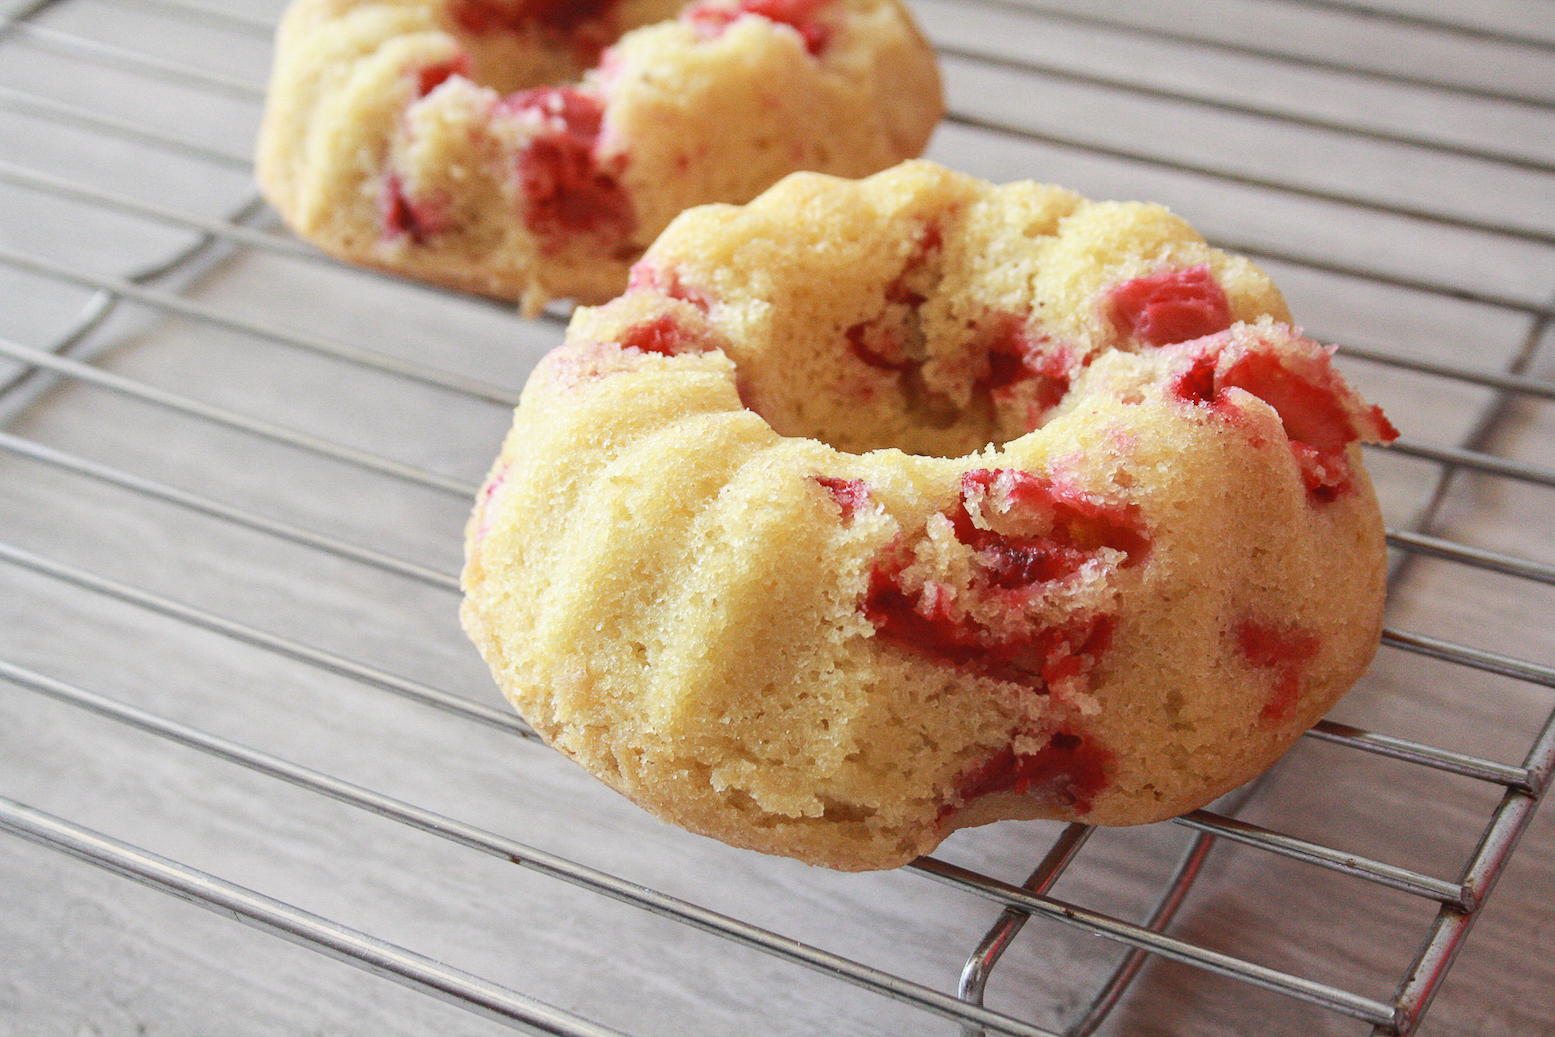 Soft, buttery bundt cakes filled with fresh strawberries and topped with a tangy, cinnamon-y compote!